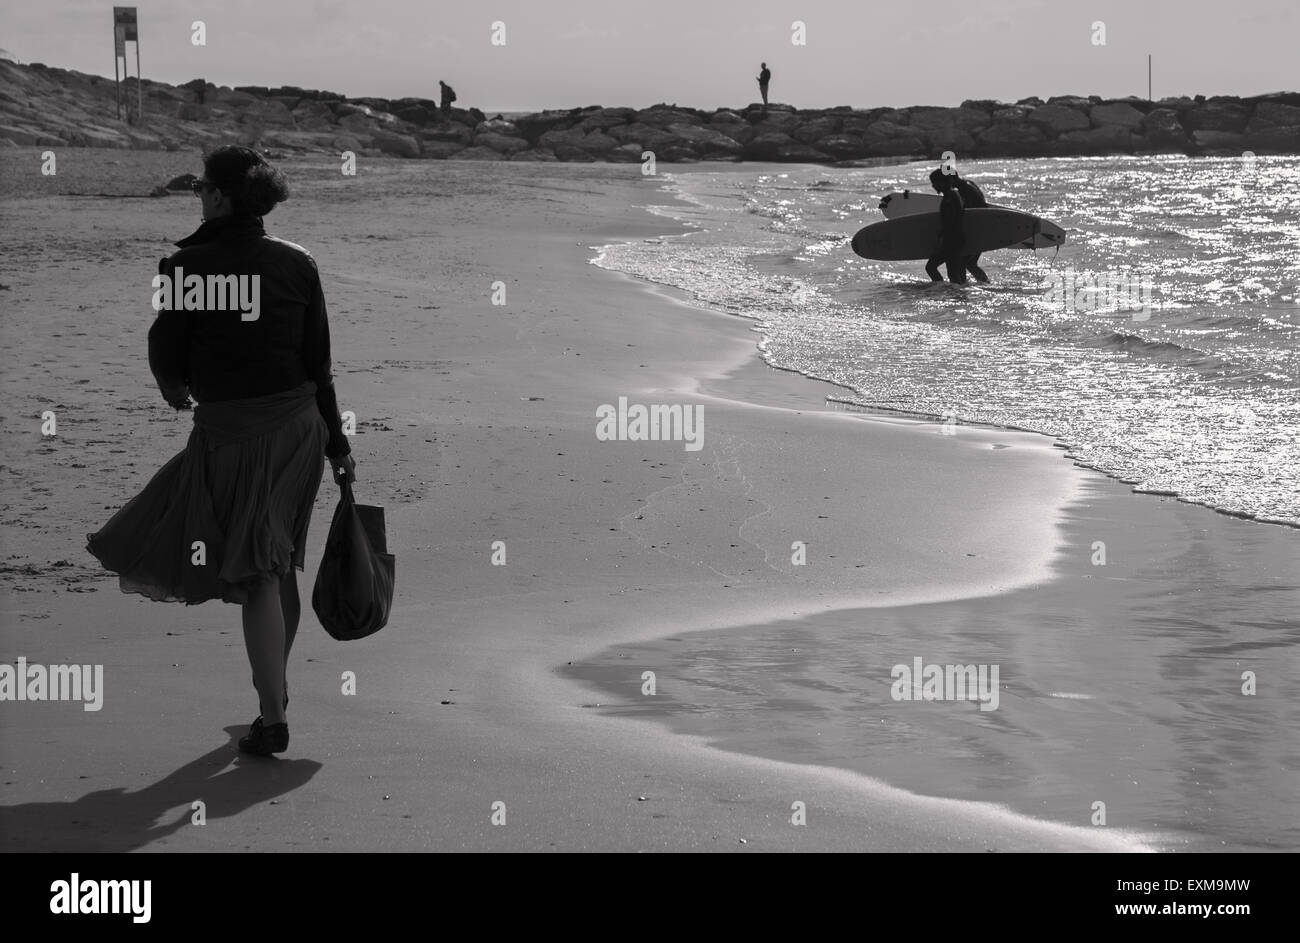 TEL AVIV, ISRAEL - MARCH 2, 2015: The silhouette of walked woman and surfers on the beach of Tel Aviv. Stock Photo